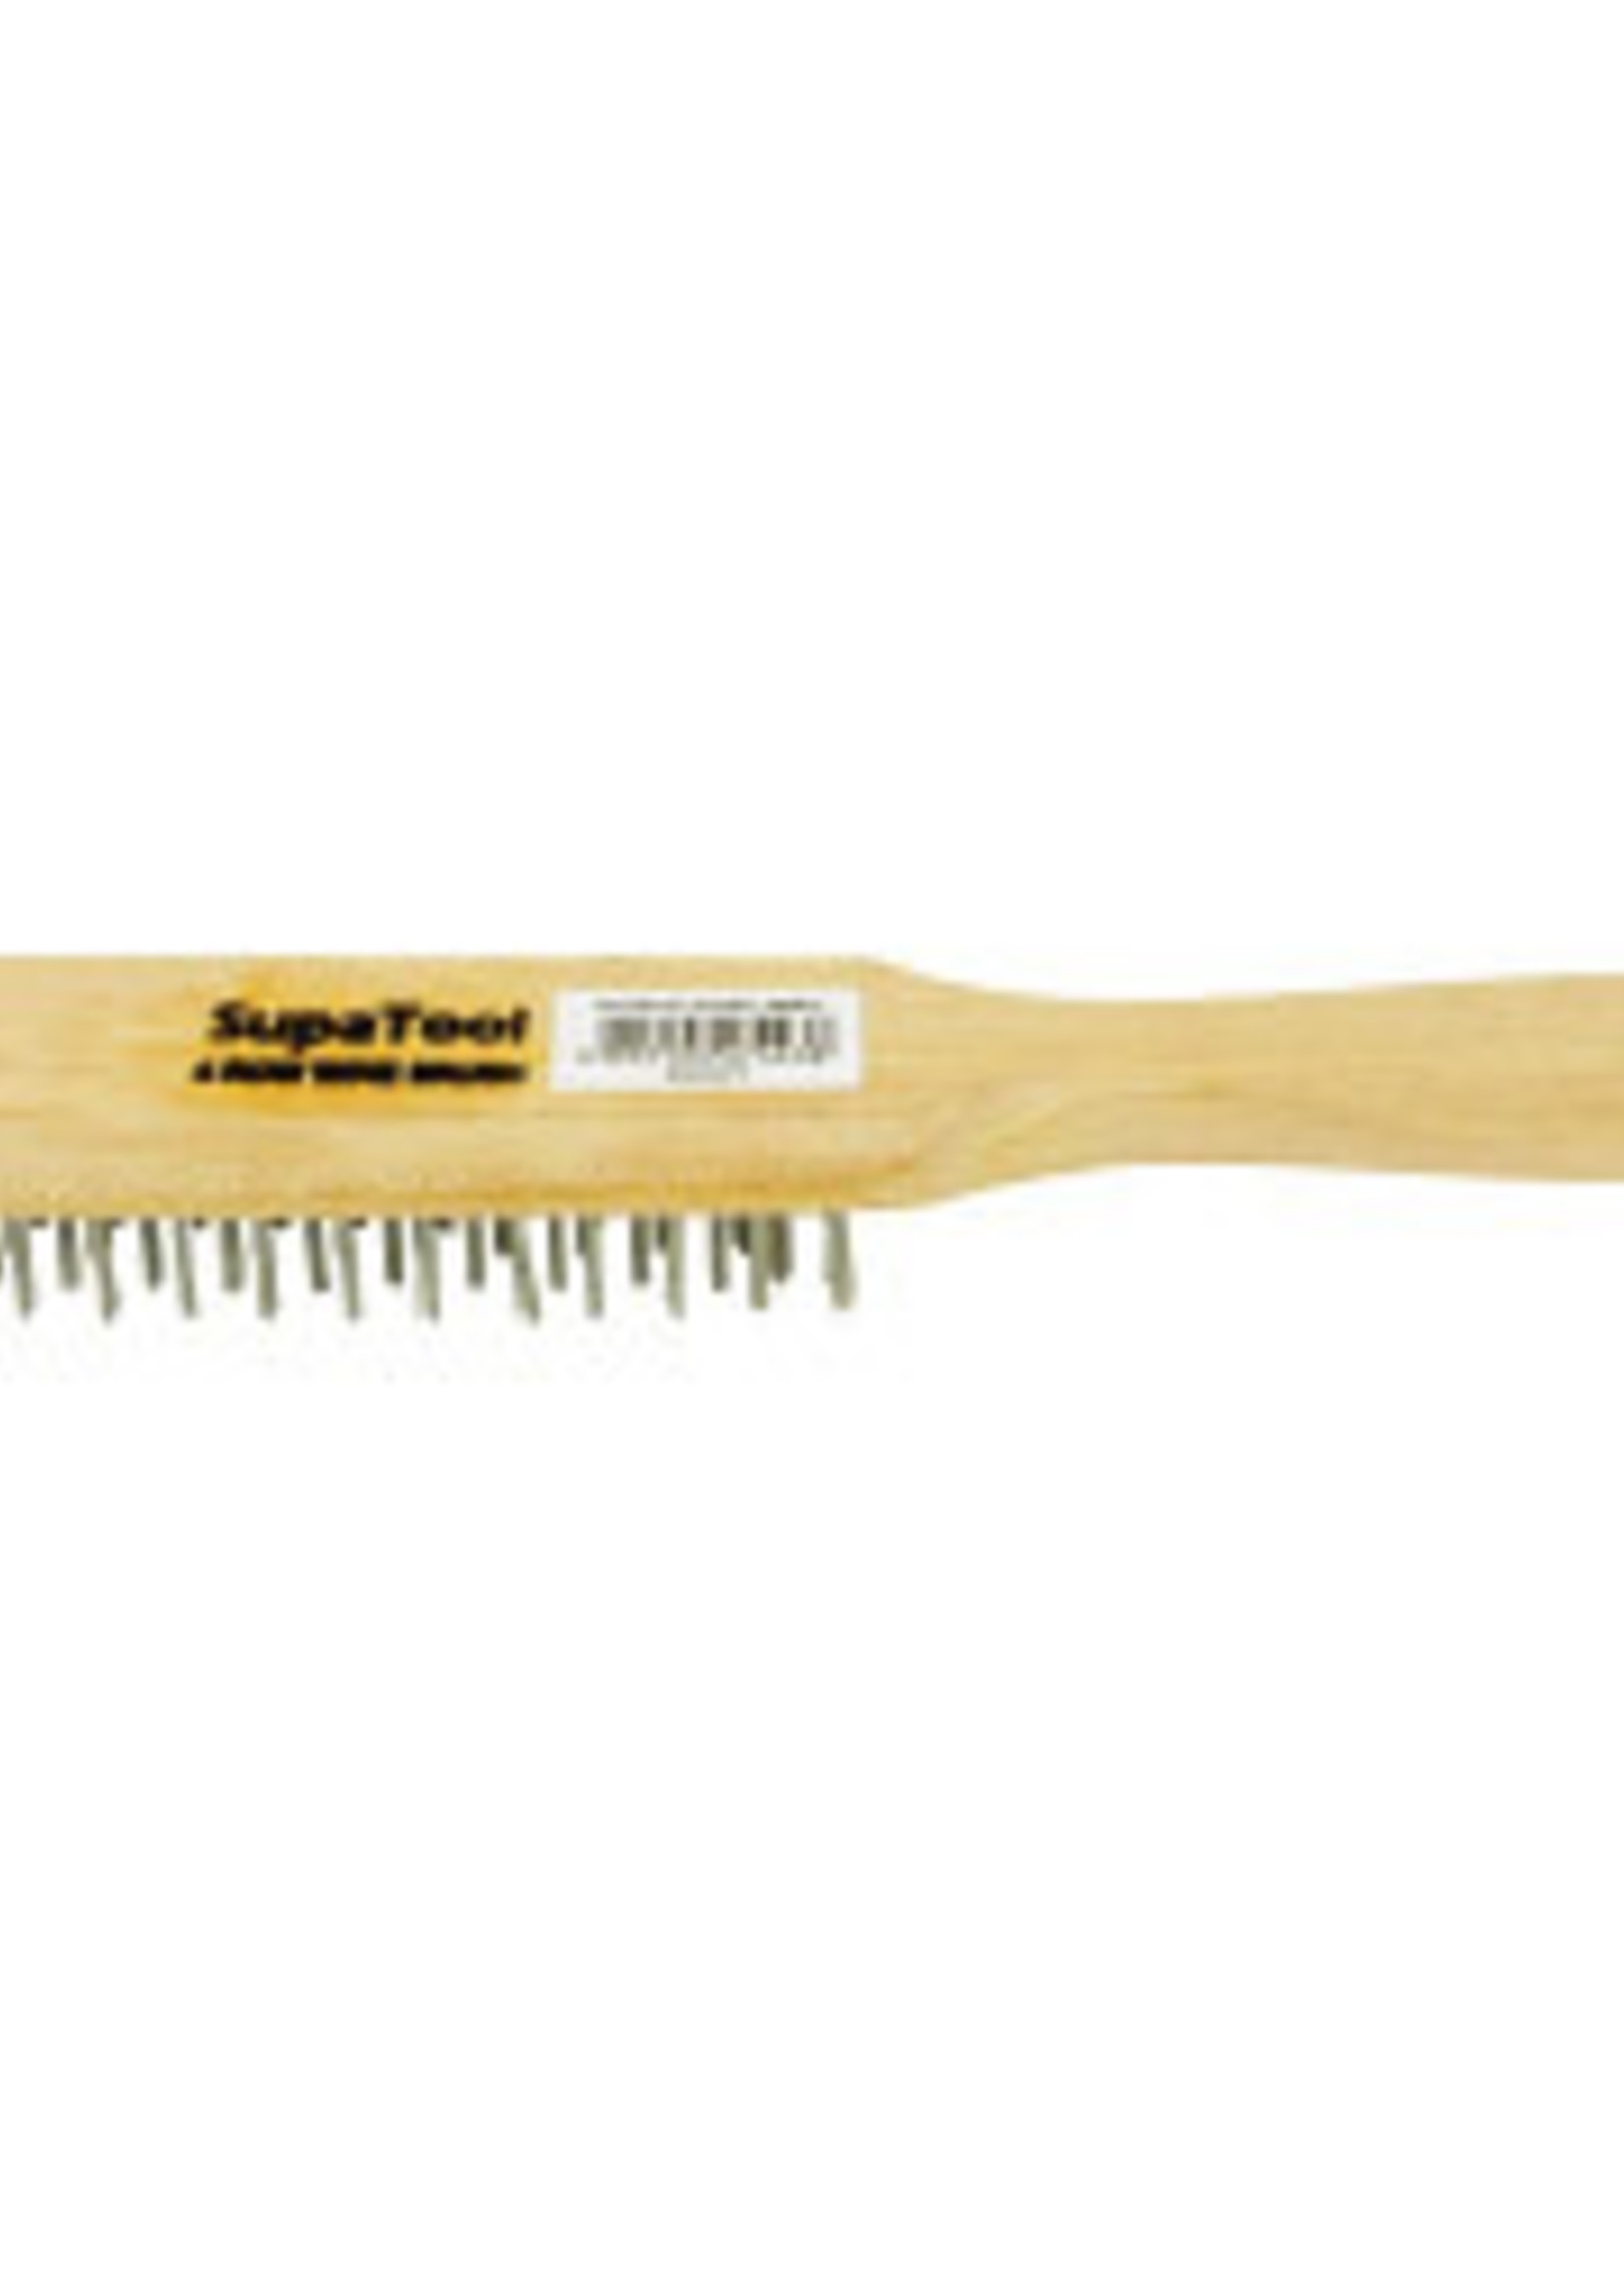 SupaTool SupaTool Wooden Handle Wire Brush 4 Rows